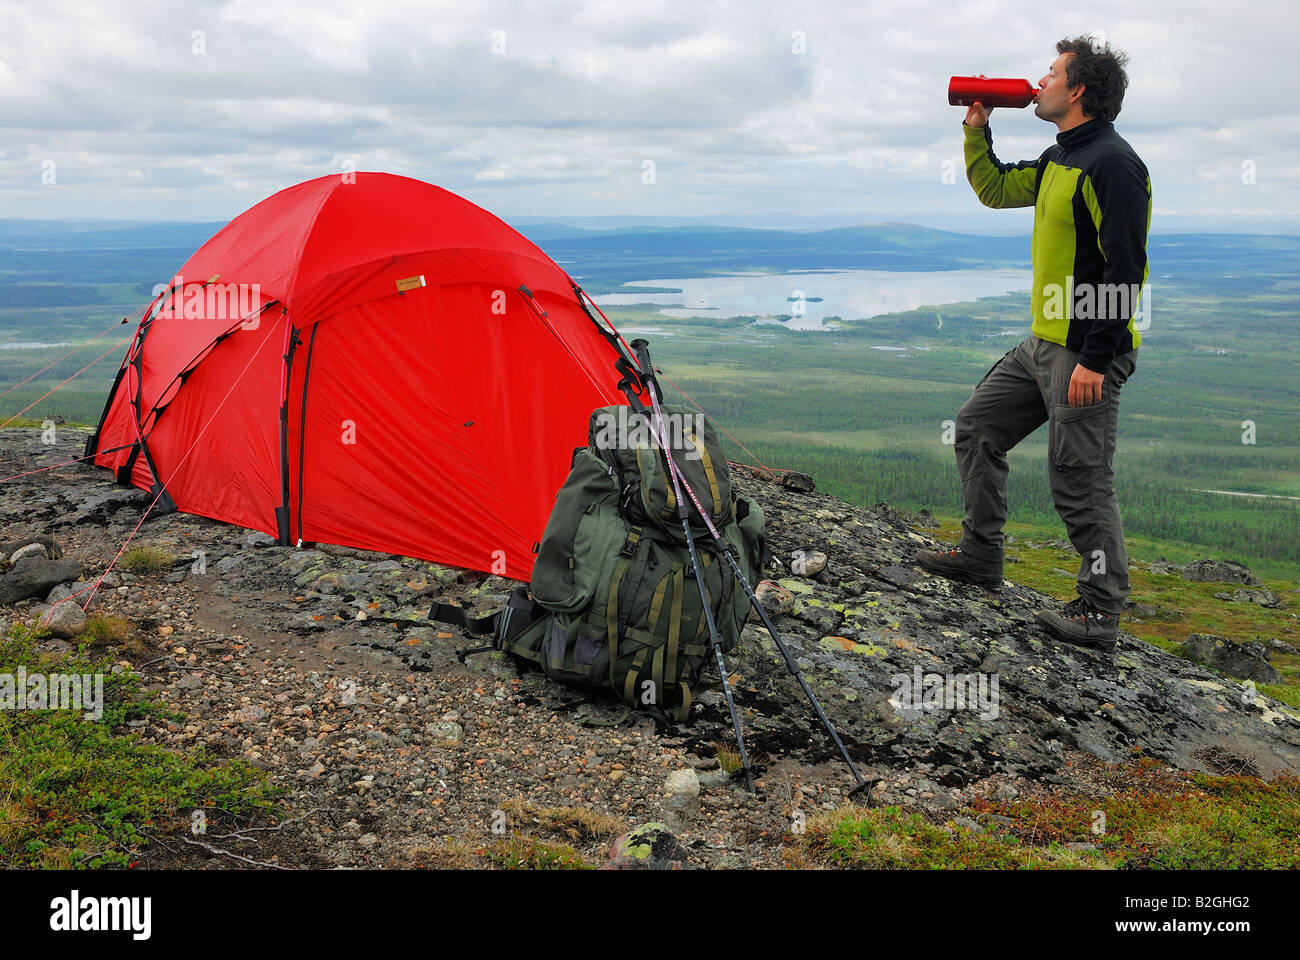 man outdoor camping viewpoint fjaell lake mount dundret gaellivare lapland sweden Stock Photo